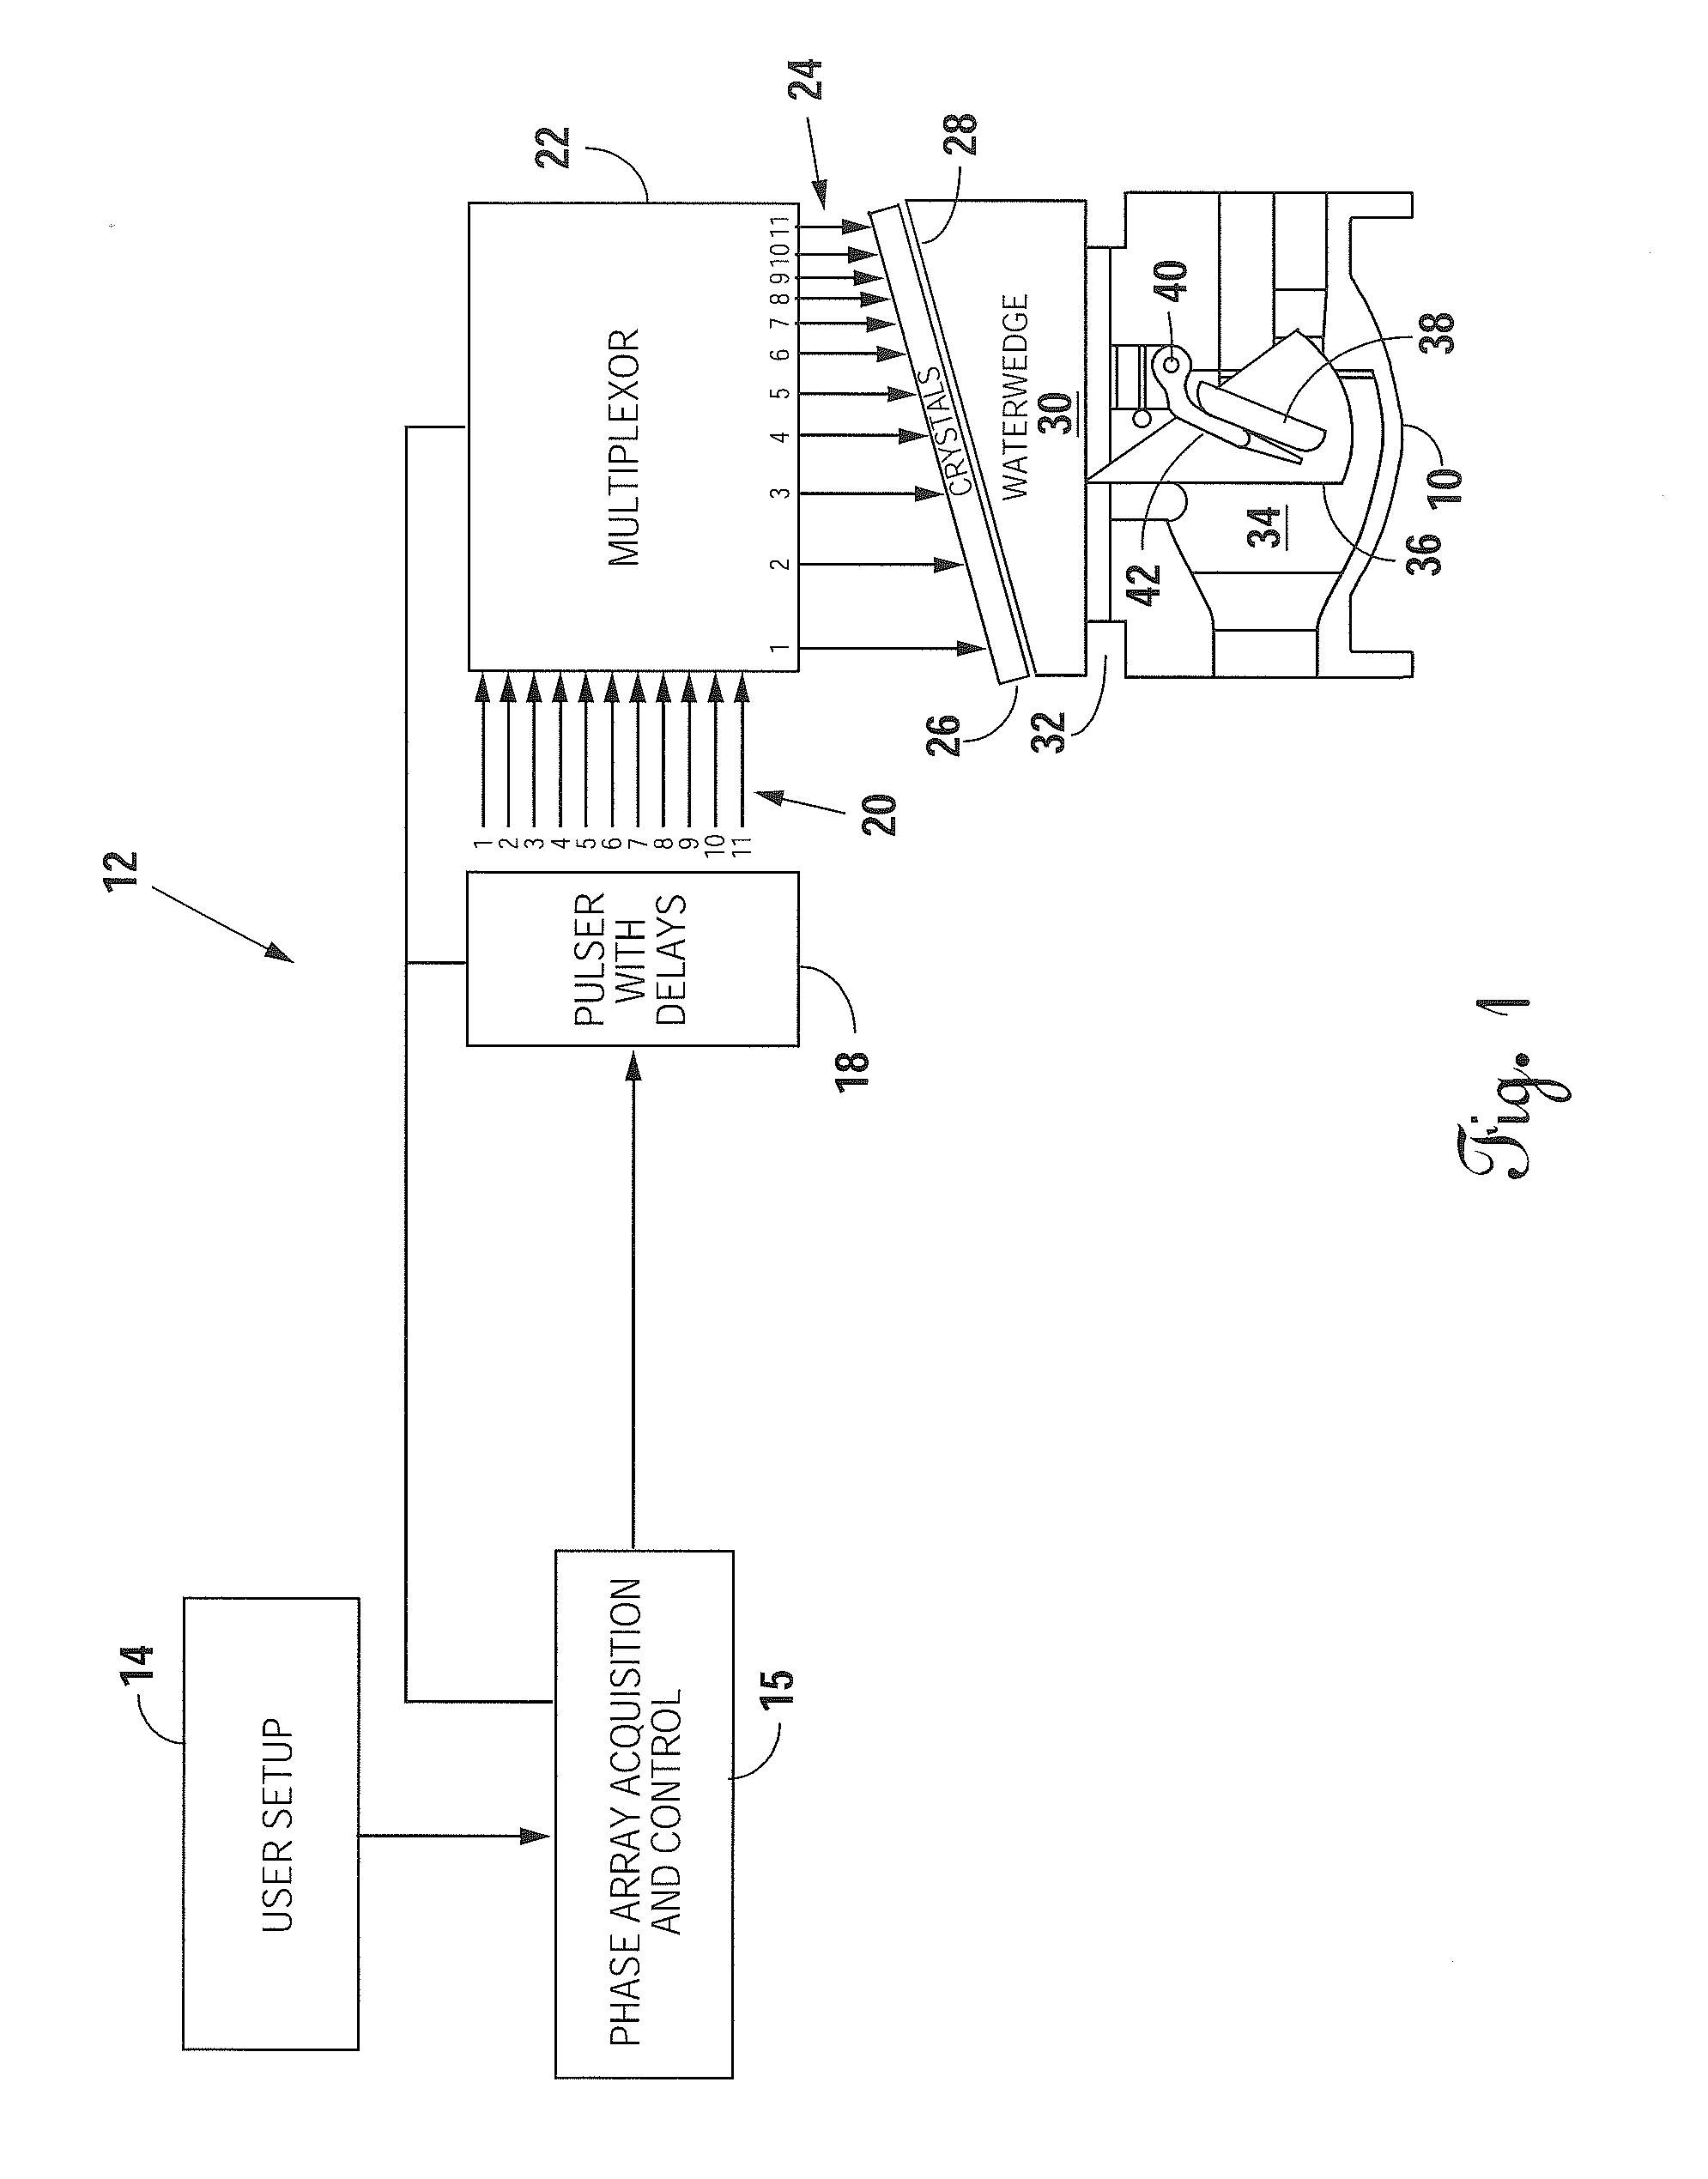 Visualization of tests on swing type check valve using phased array sequence scanning